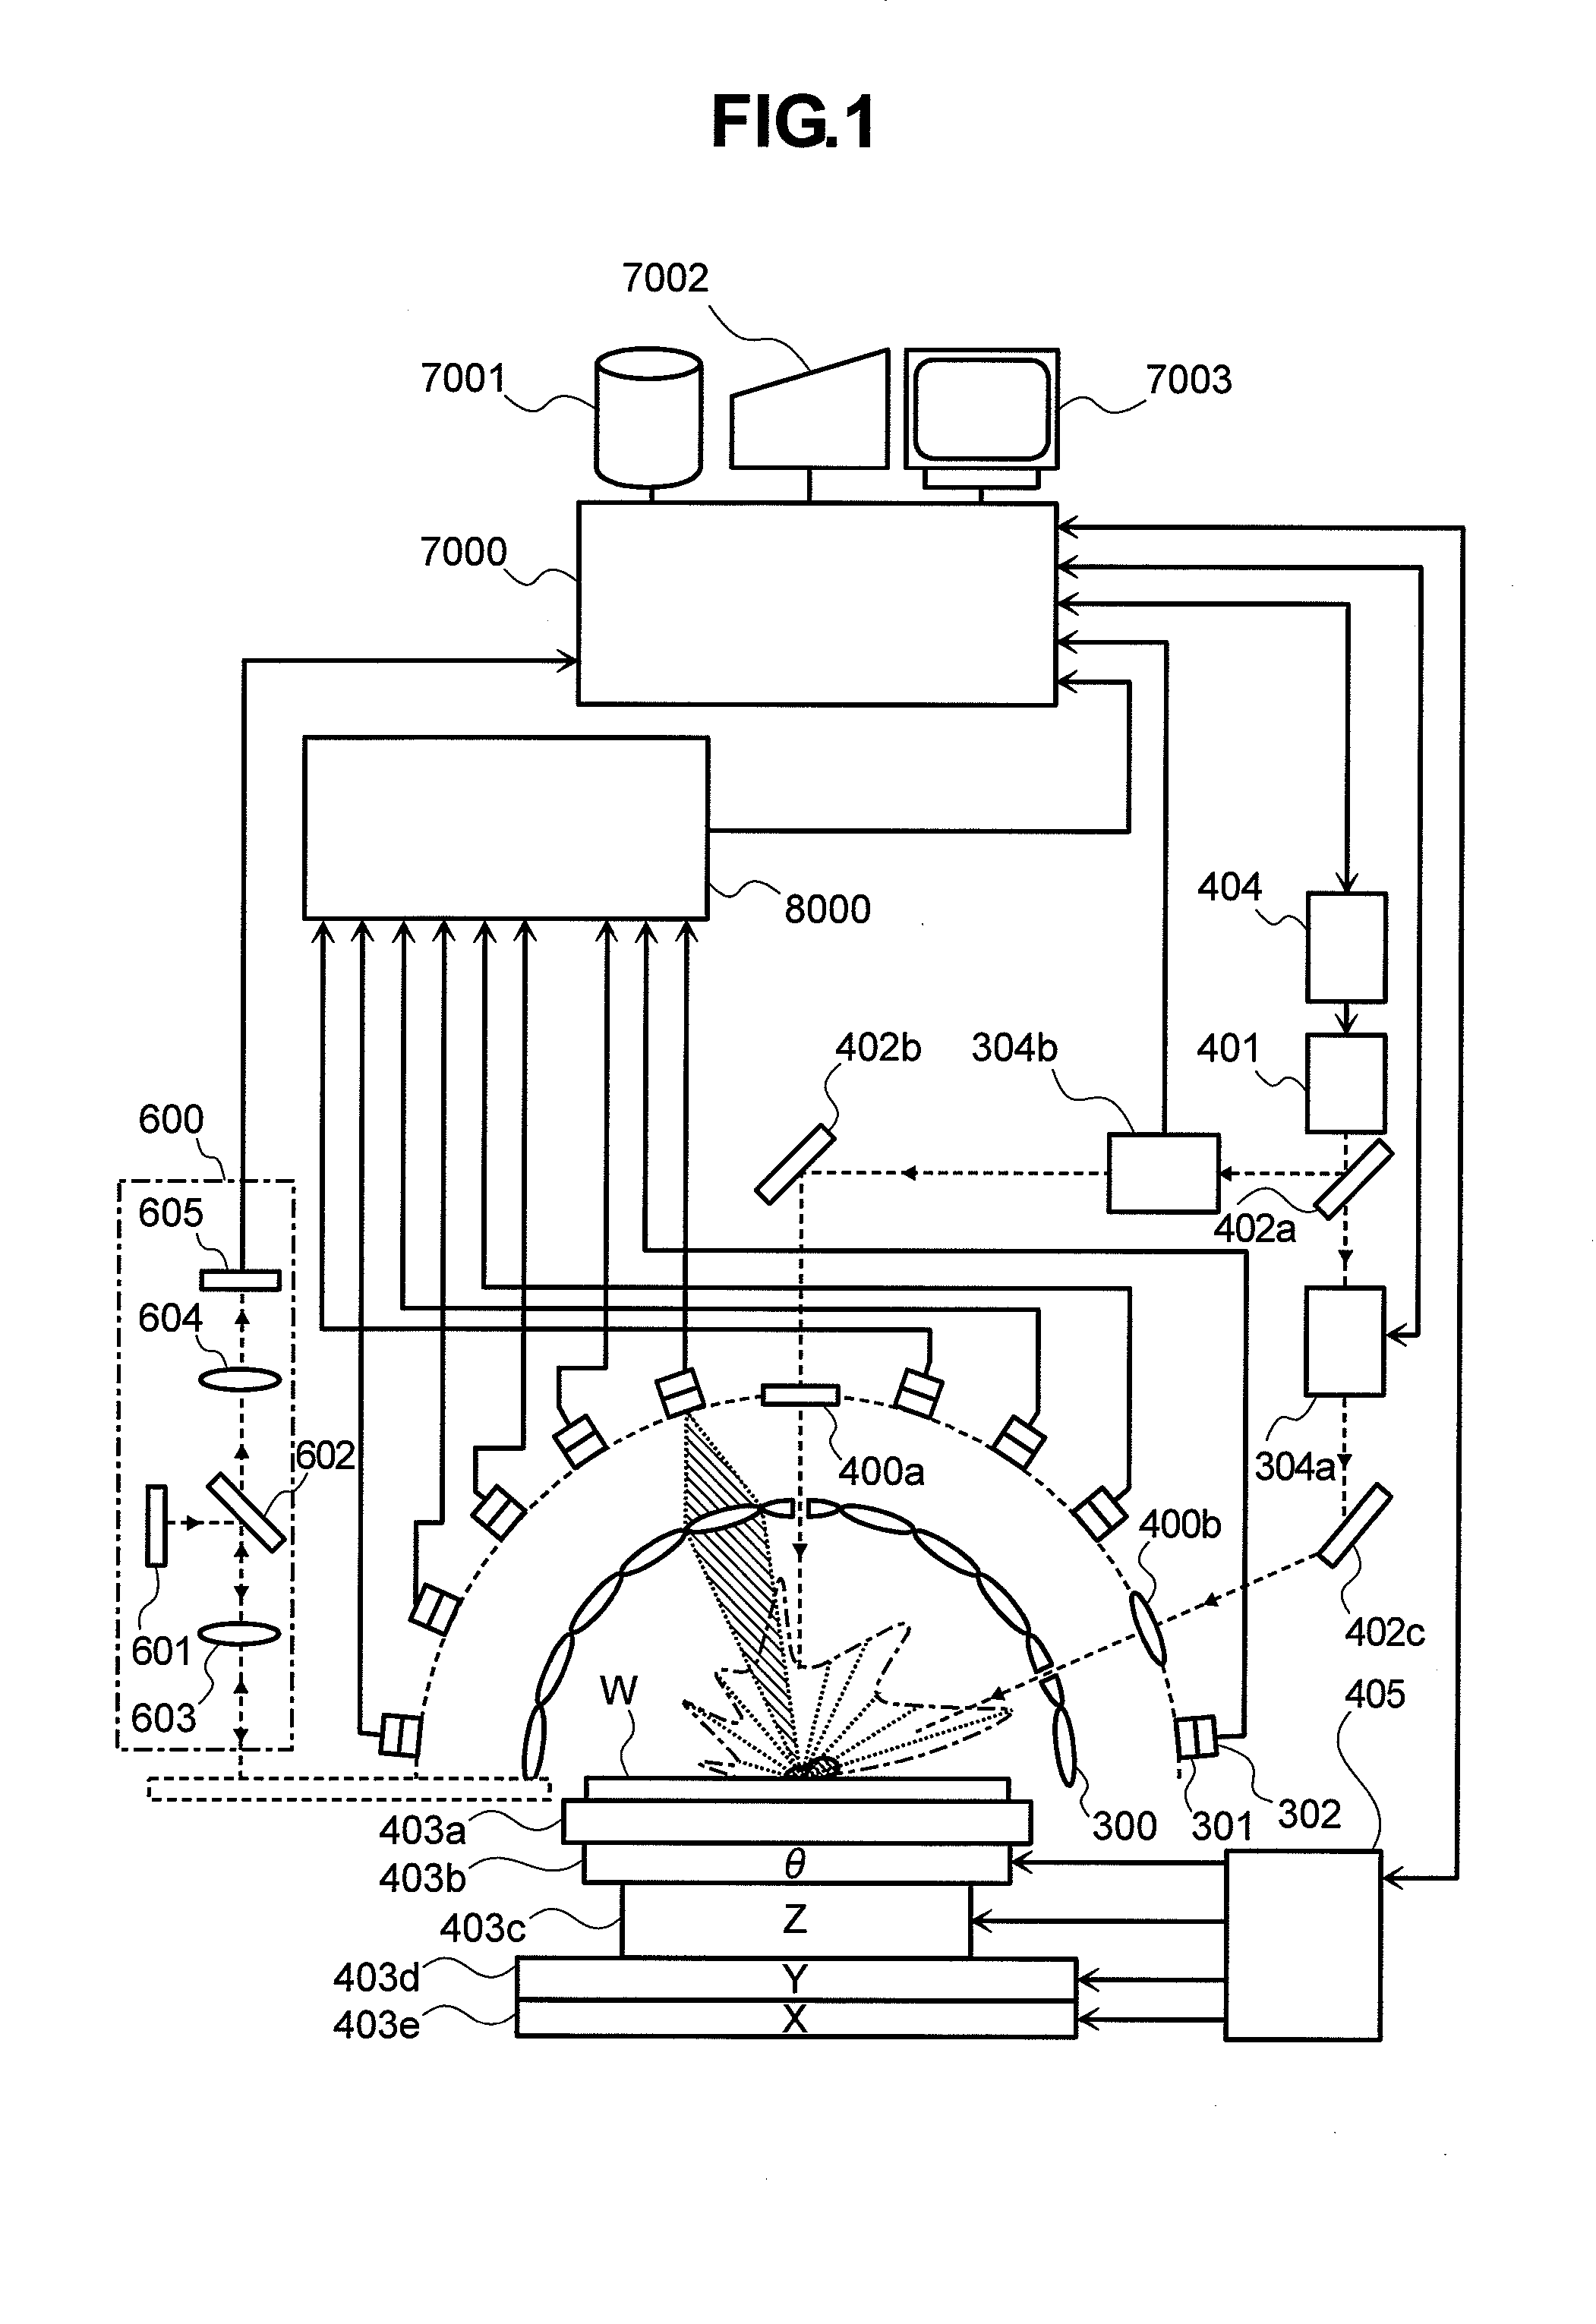 Method and apparatus for detecting defects